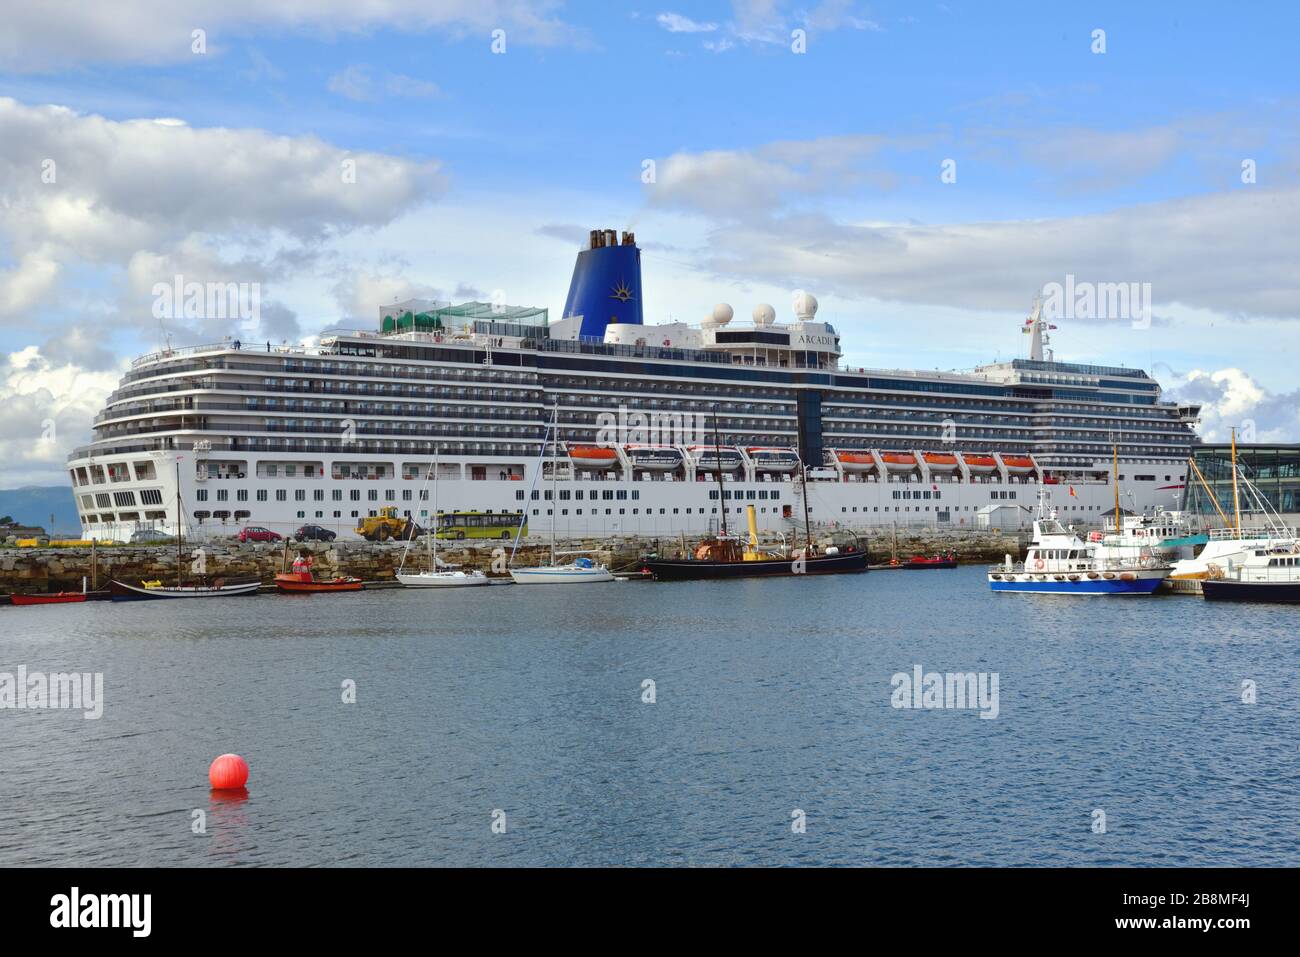 P & O  cruise ship Arcadia is seen berthed at Trondheim, Norway. Stock Photo